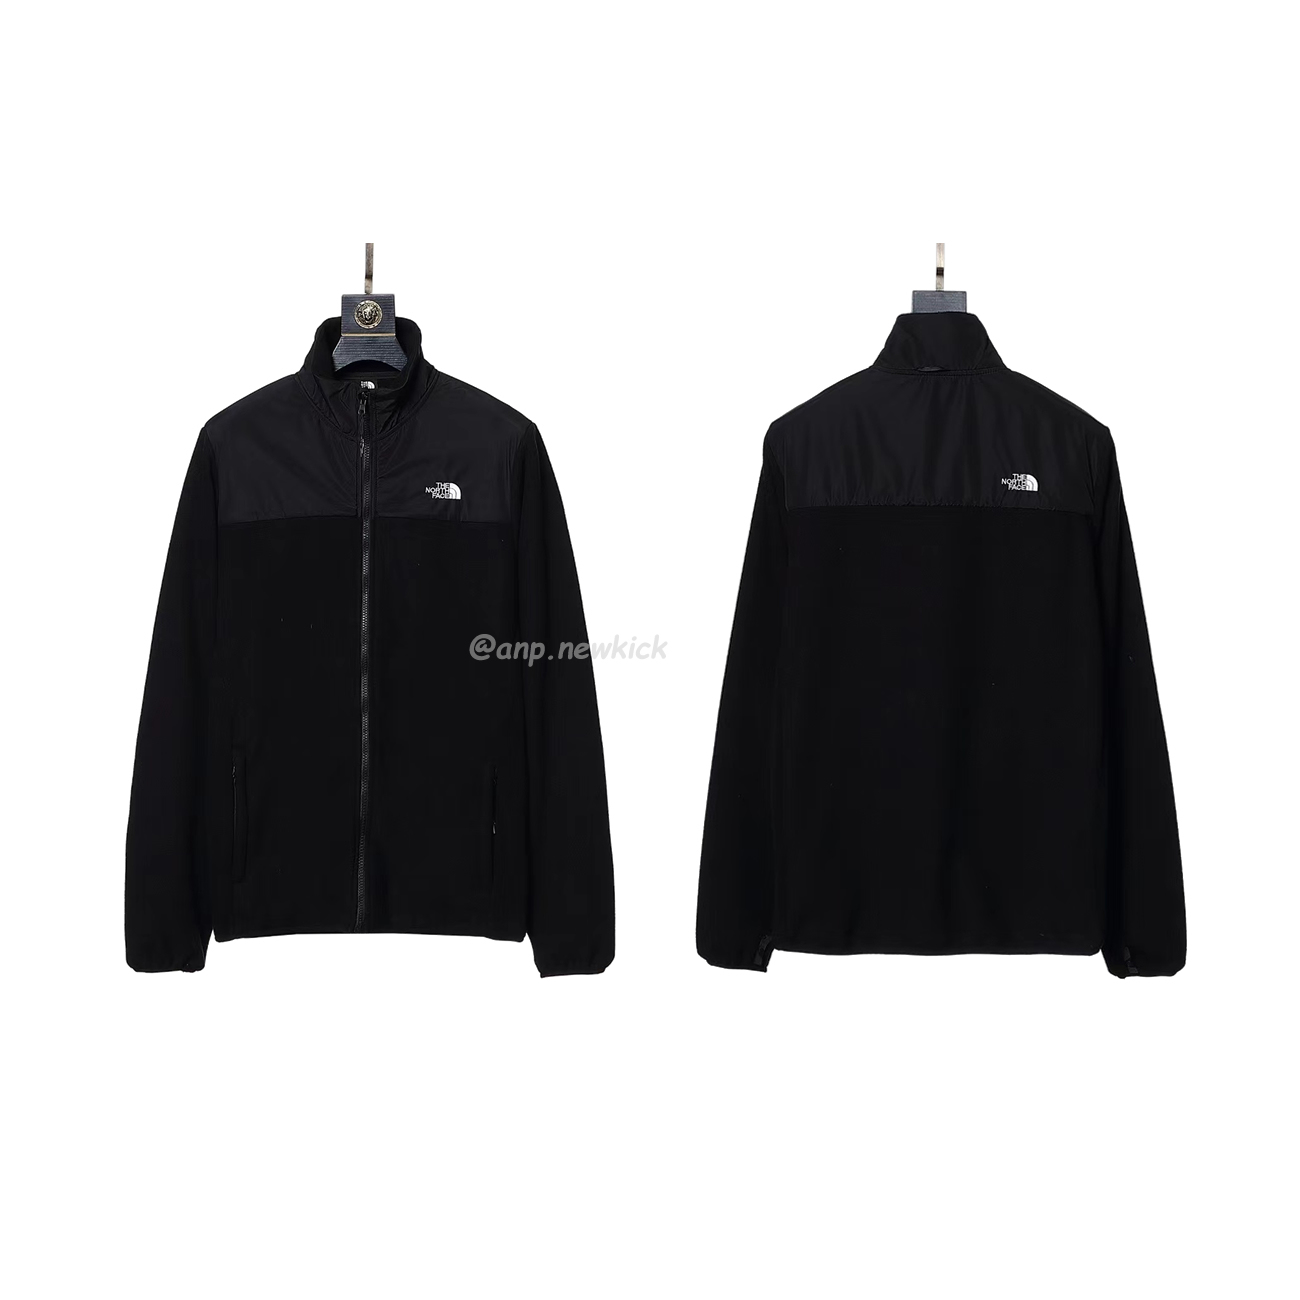 The North Face M Tka 100 Zip In Jacket   Ap (1) - newkick.org